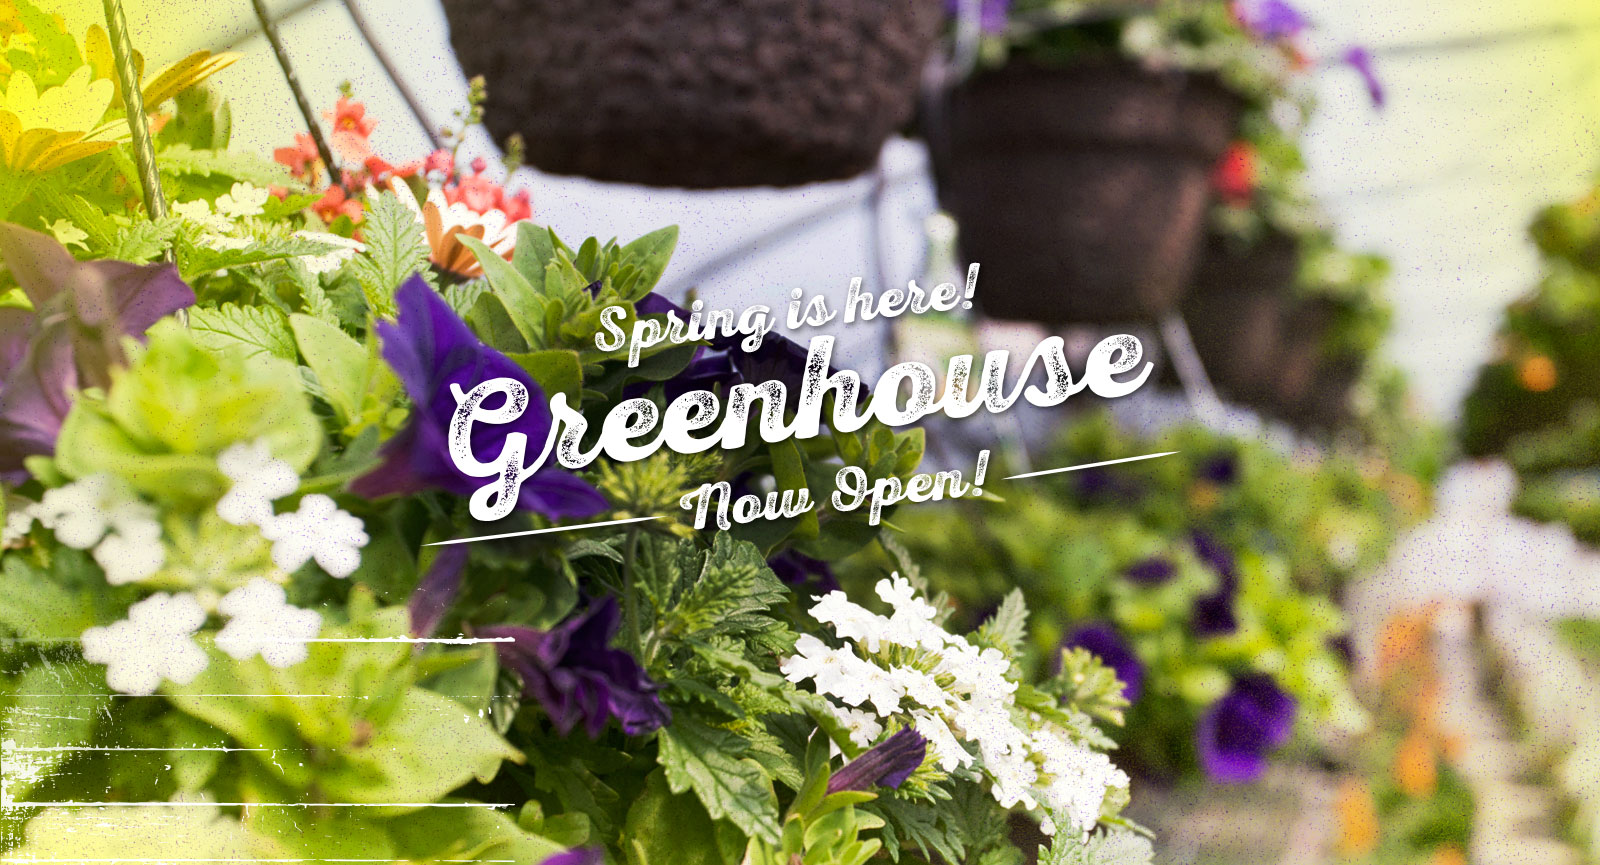 Greenhouse Now Open